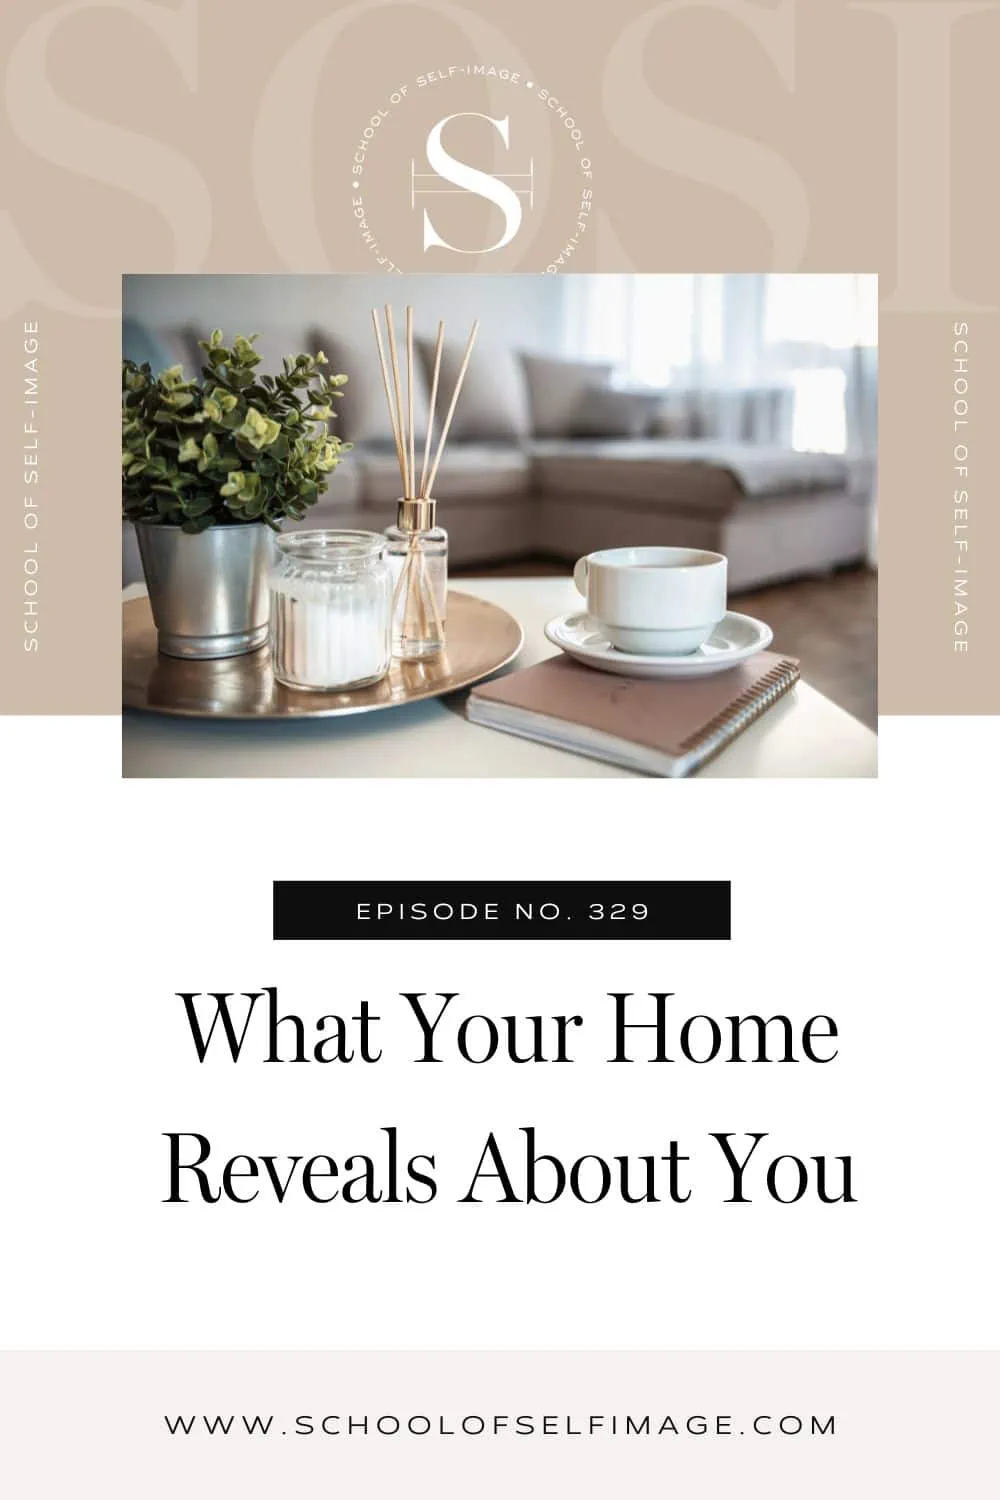 What Your Home Reveals About You